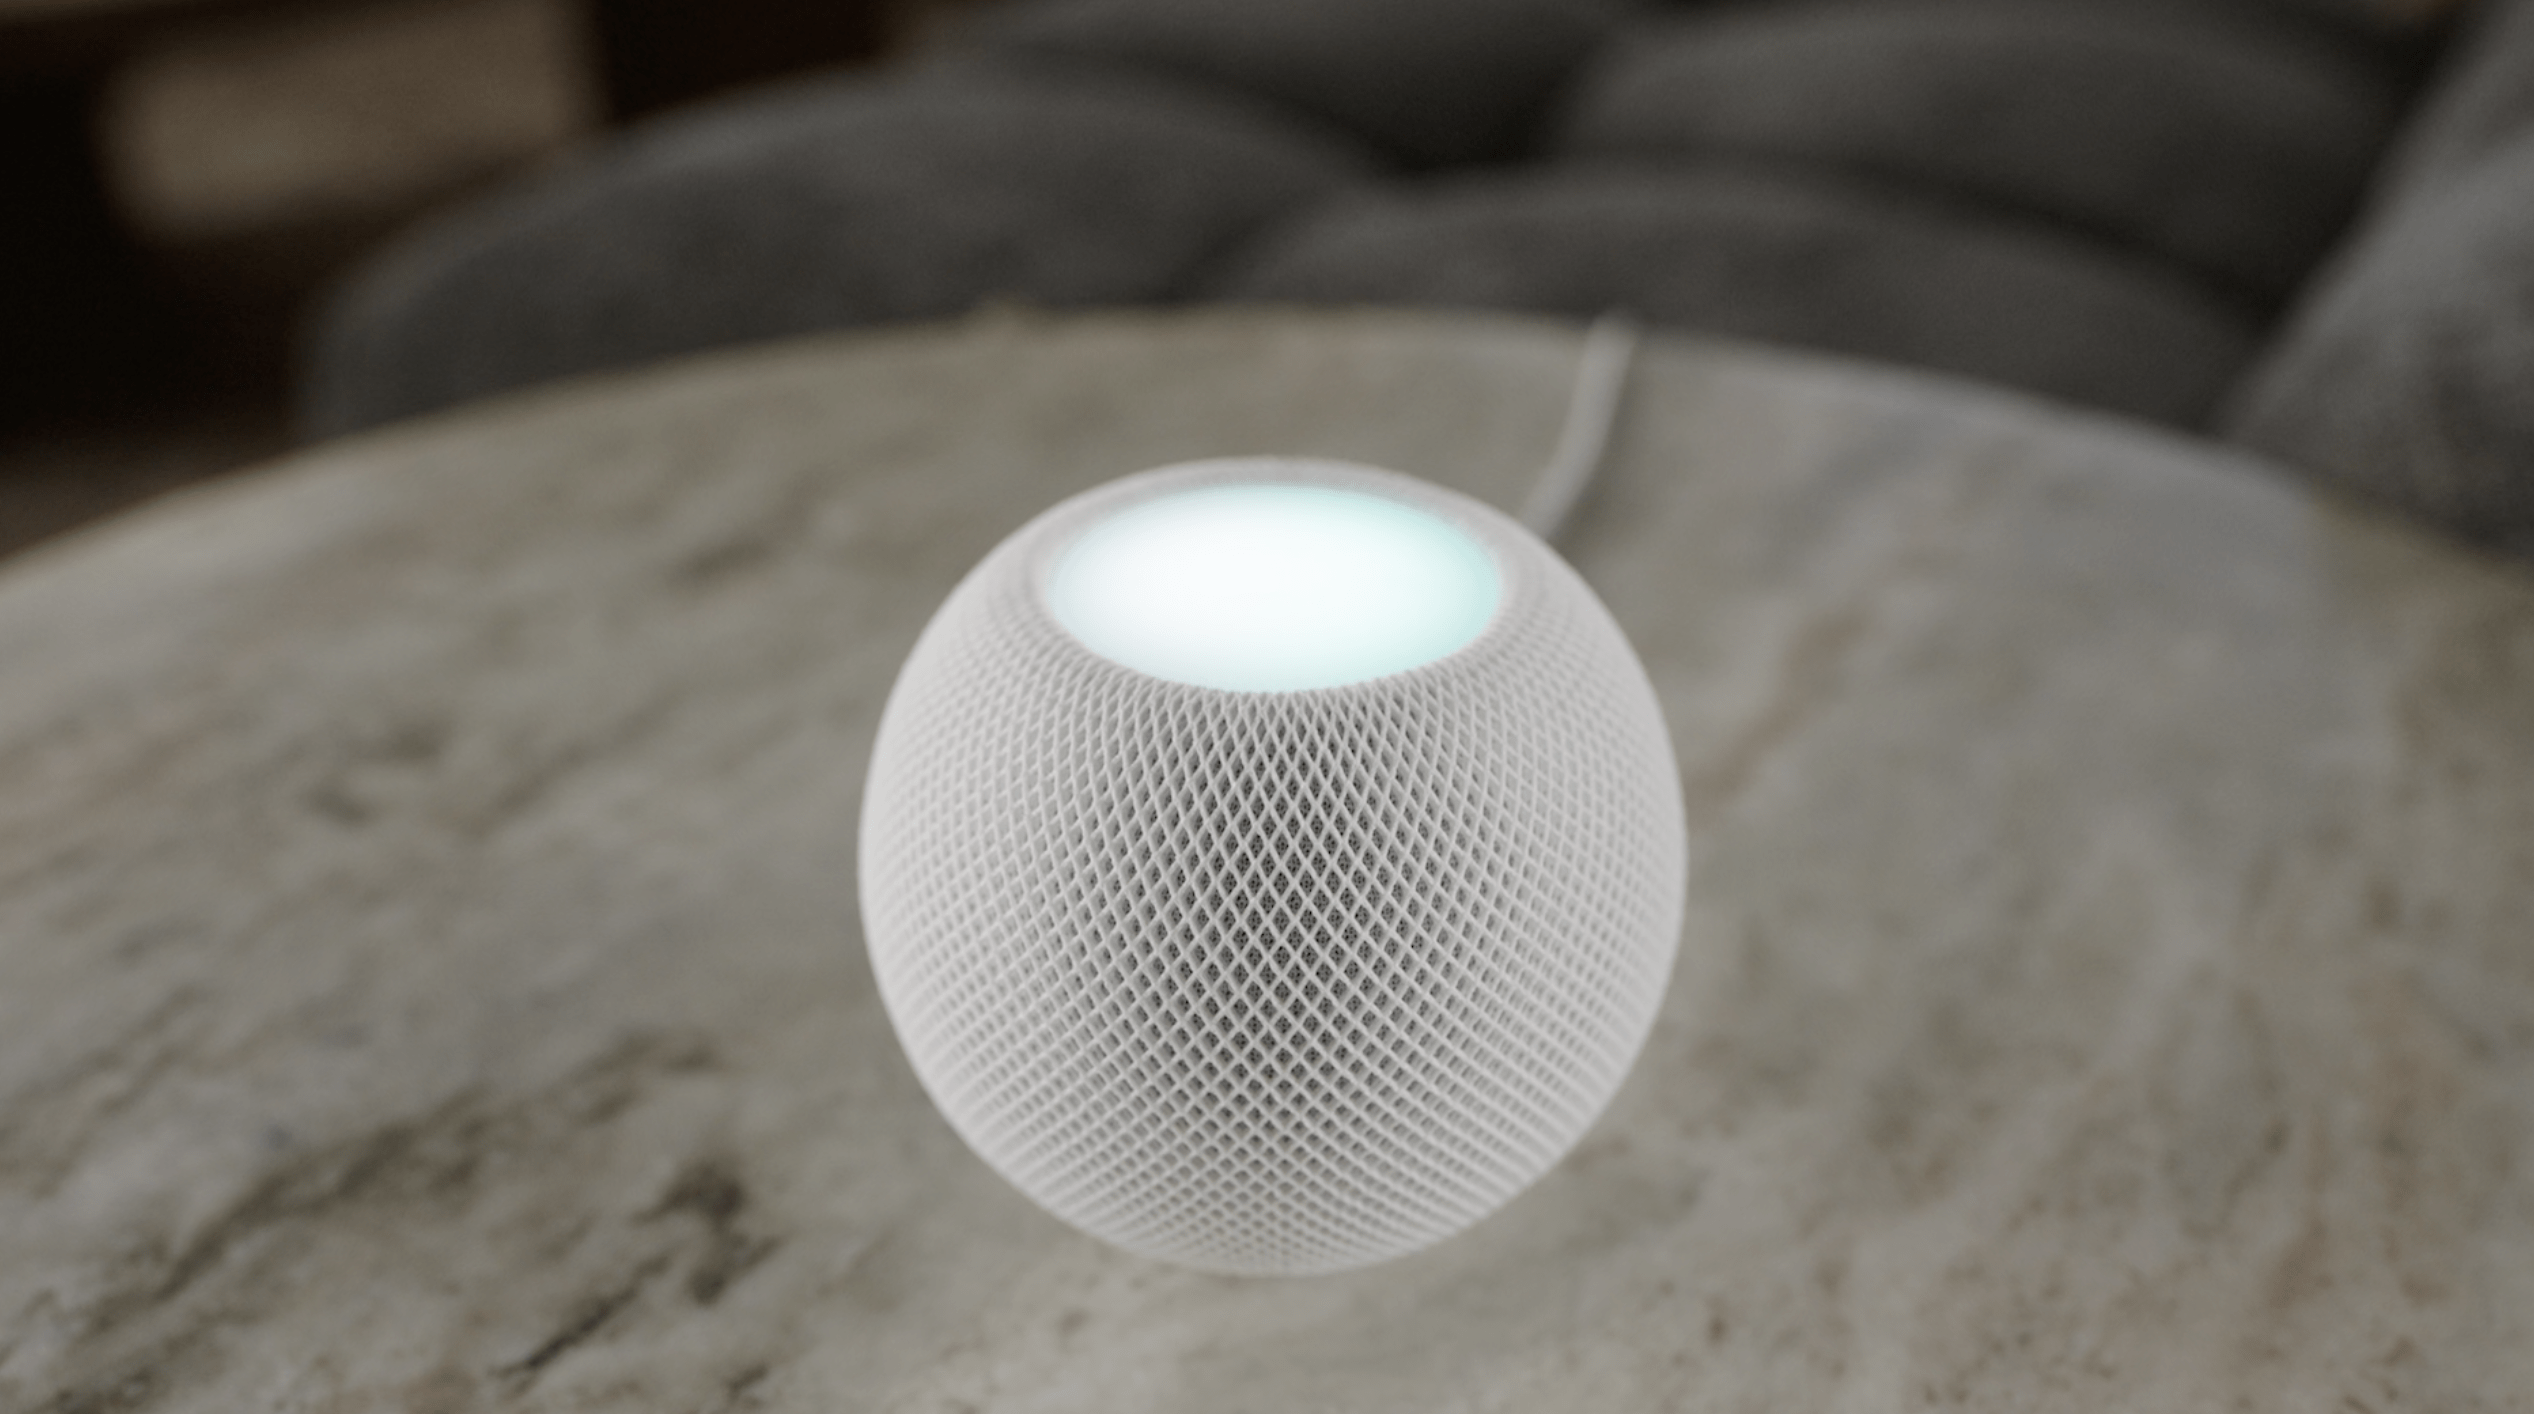 HomePod Mini is here available from 6th November